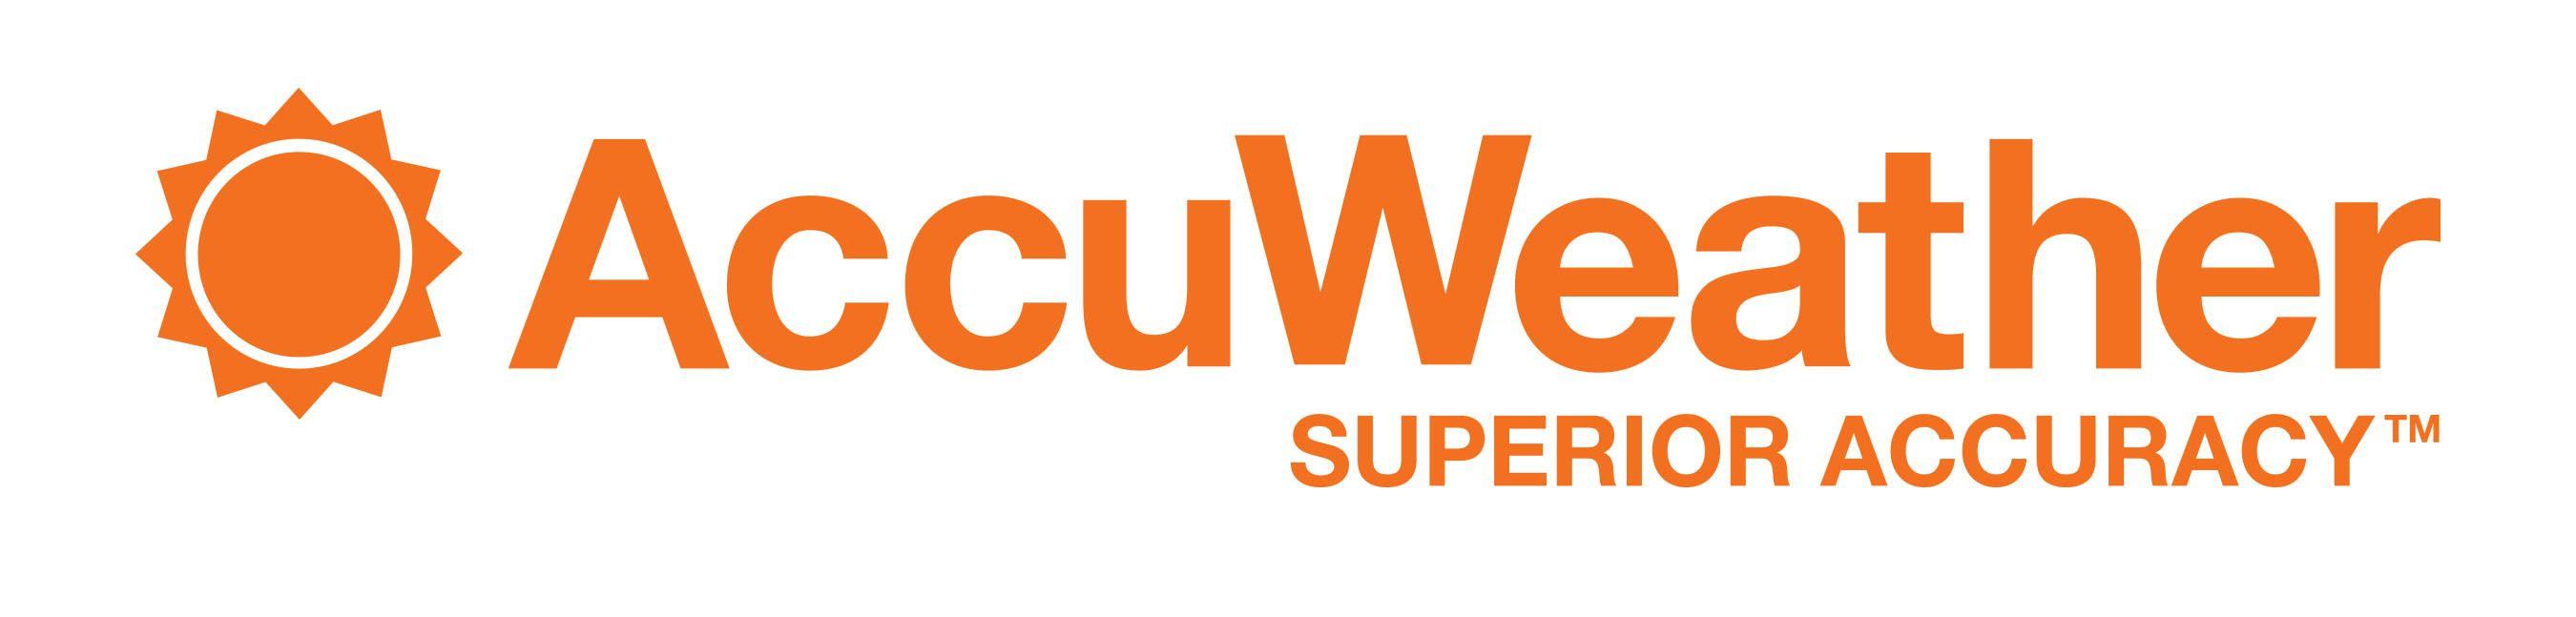 Accuweather.com Logo - AccuWeather Network Bolsters 24/7 All-Weather Cable Programming with ...